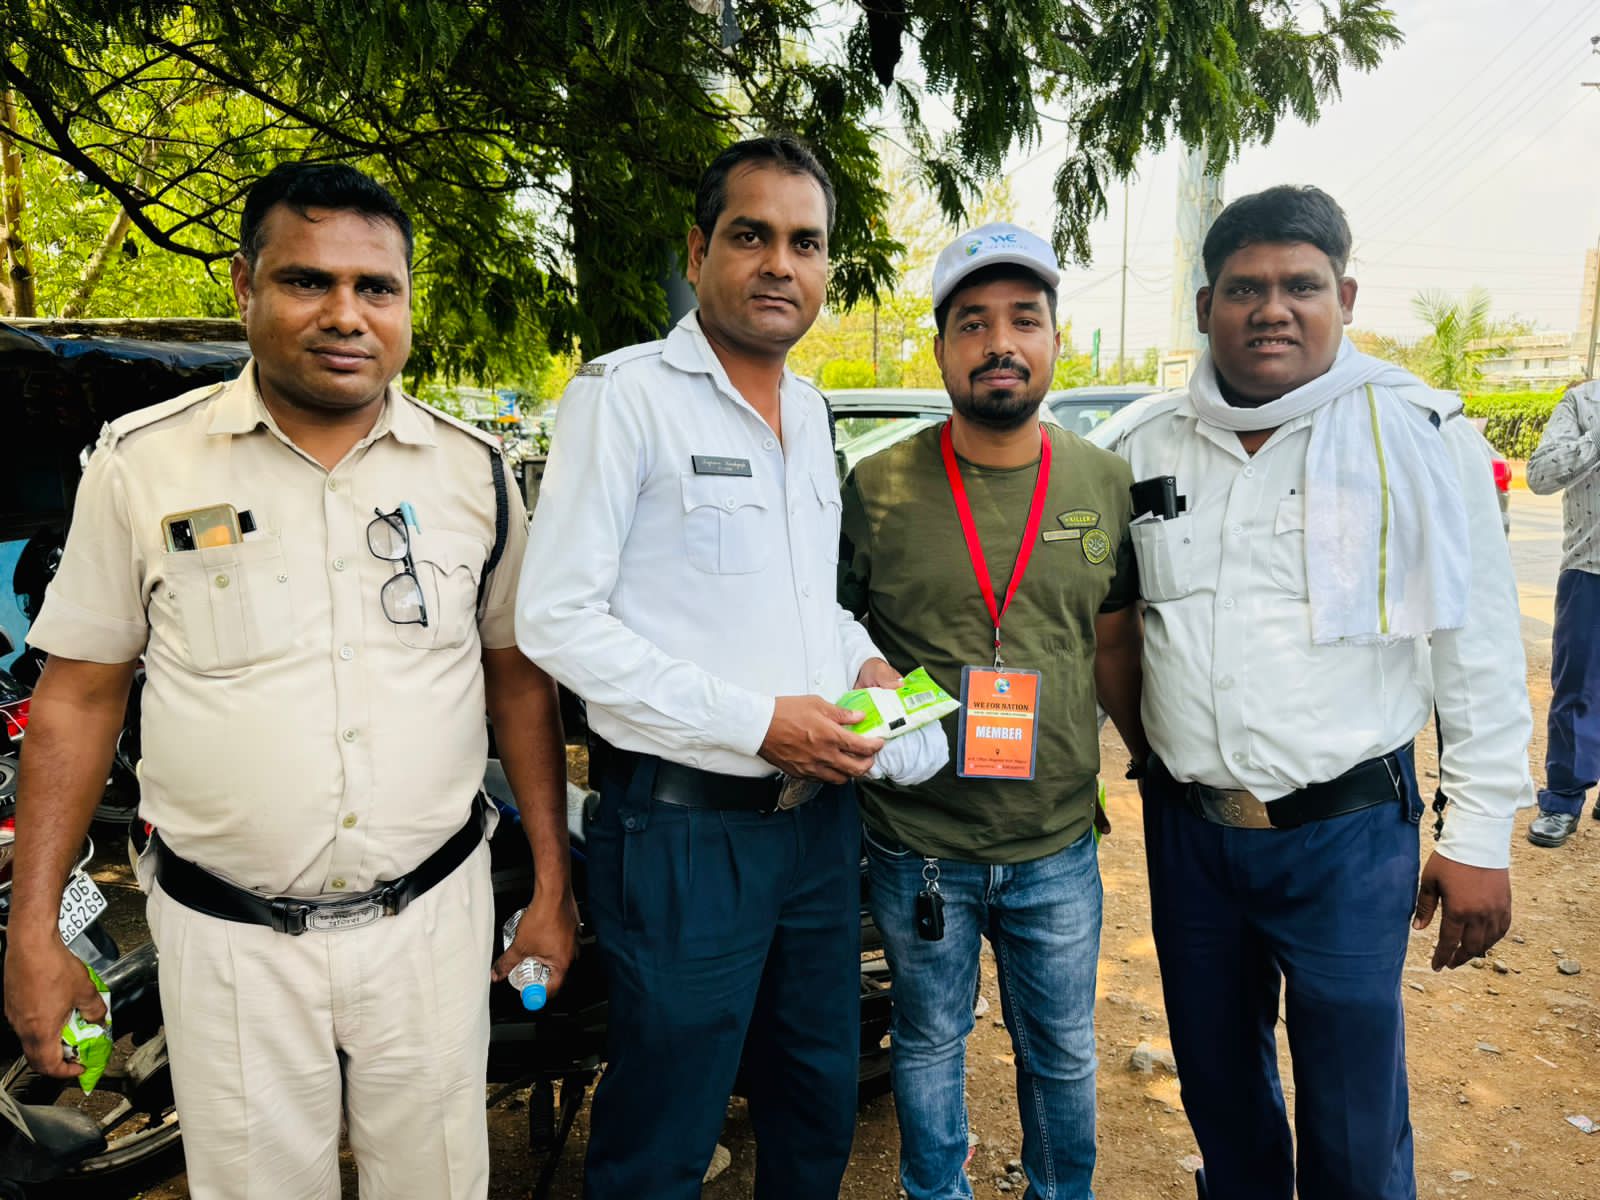 Buttermilk and electrical powder distributed to traffic personnel to provide relief from heat, V For Nation organization started service campaign, Raipur, Chhattisgarh, Khabargali